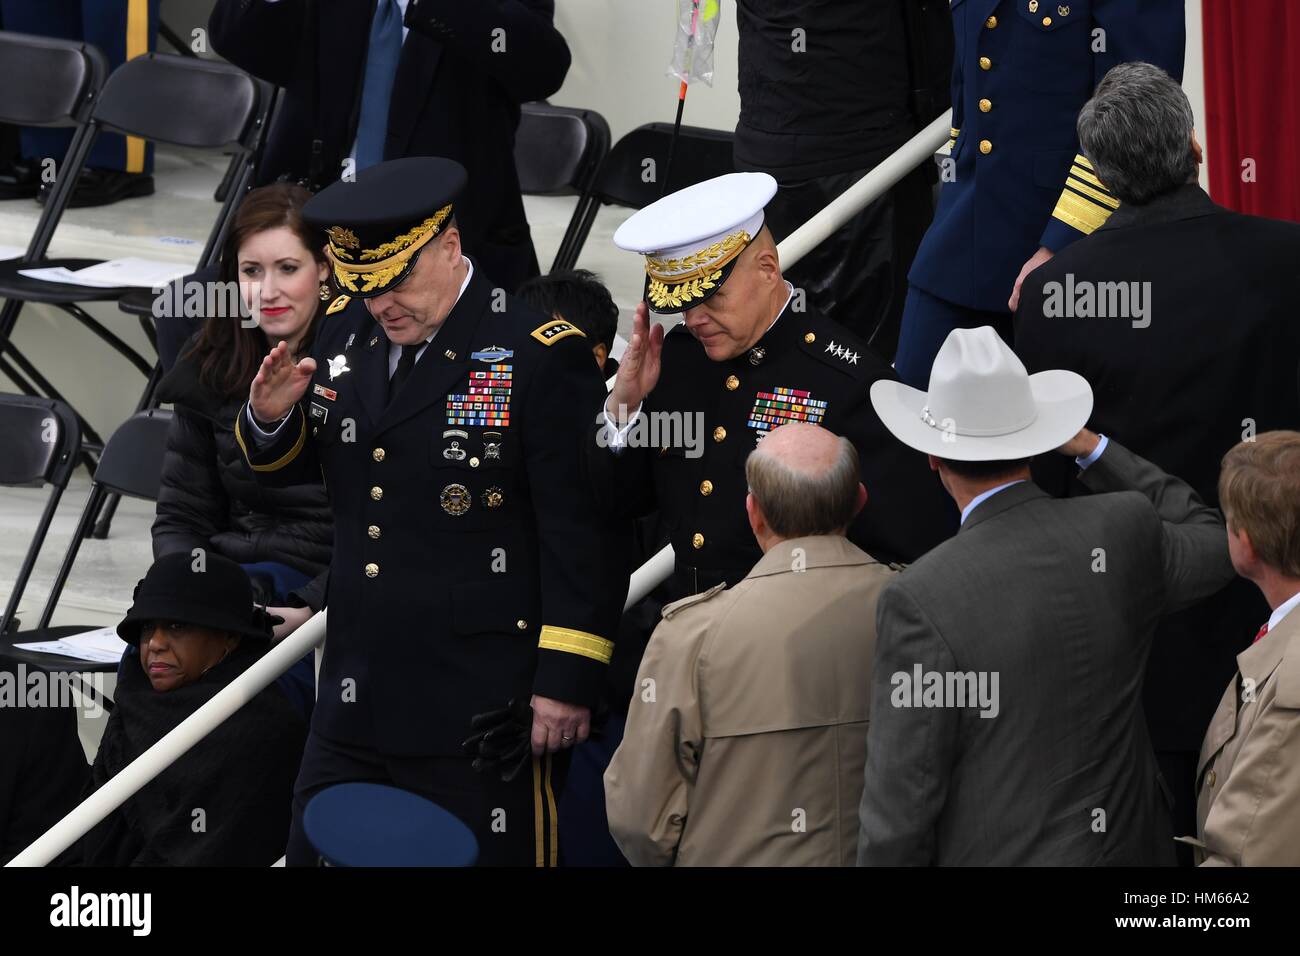 Members of the Joint Chiefs Salute as they arrive for the Inauguration of President-elect Donald Trump as the 45th President on Capitol Hill January 20, 2017 in Washington, DC. Chief of Staff of the Army Gen. Mark A. Milley is on the left and Commandant of the Marine Corps Gen. Robert B. Neller the right. Stock Photo